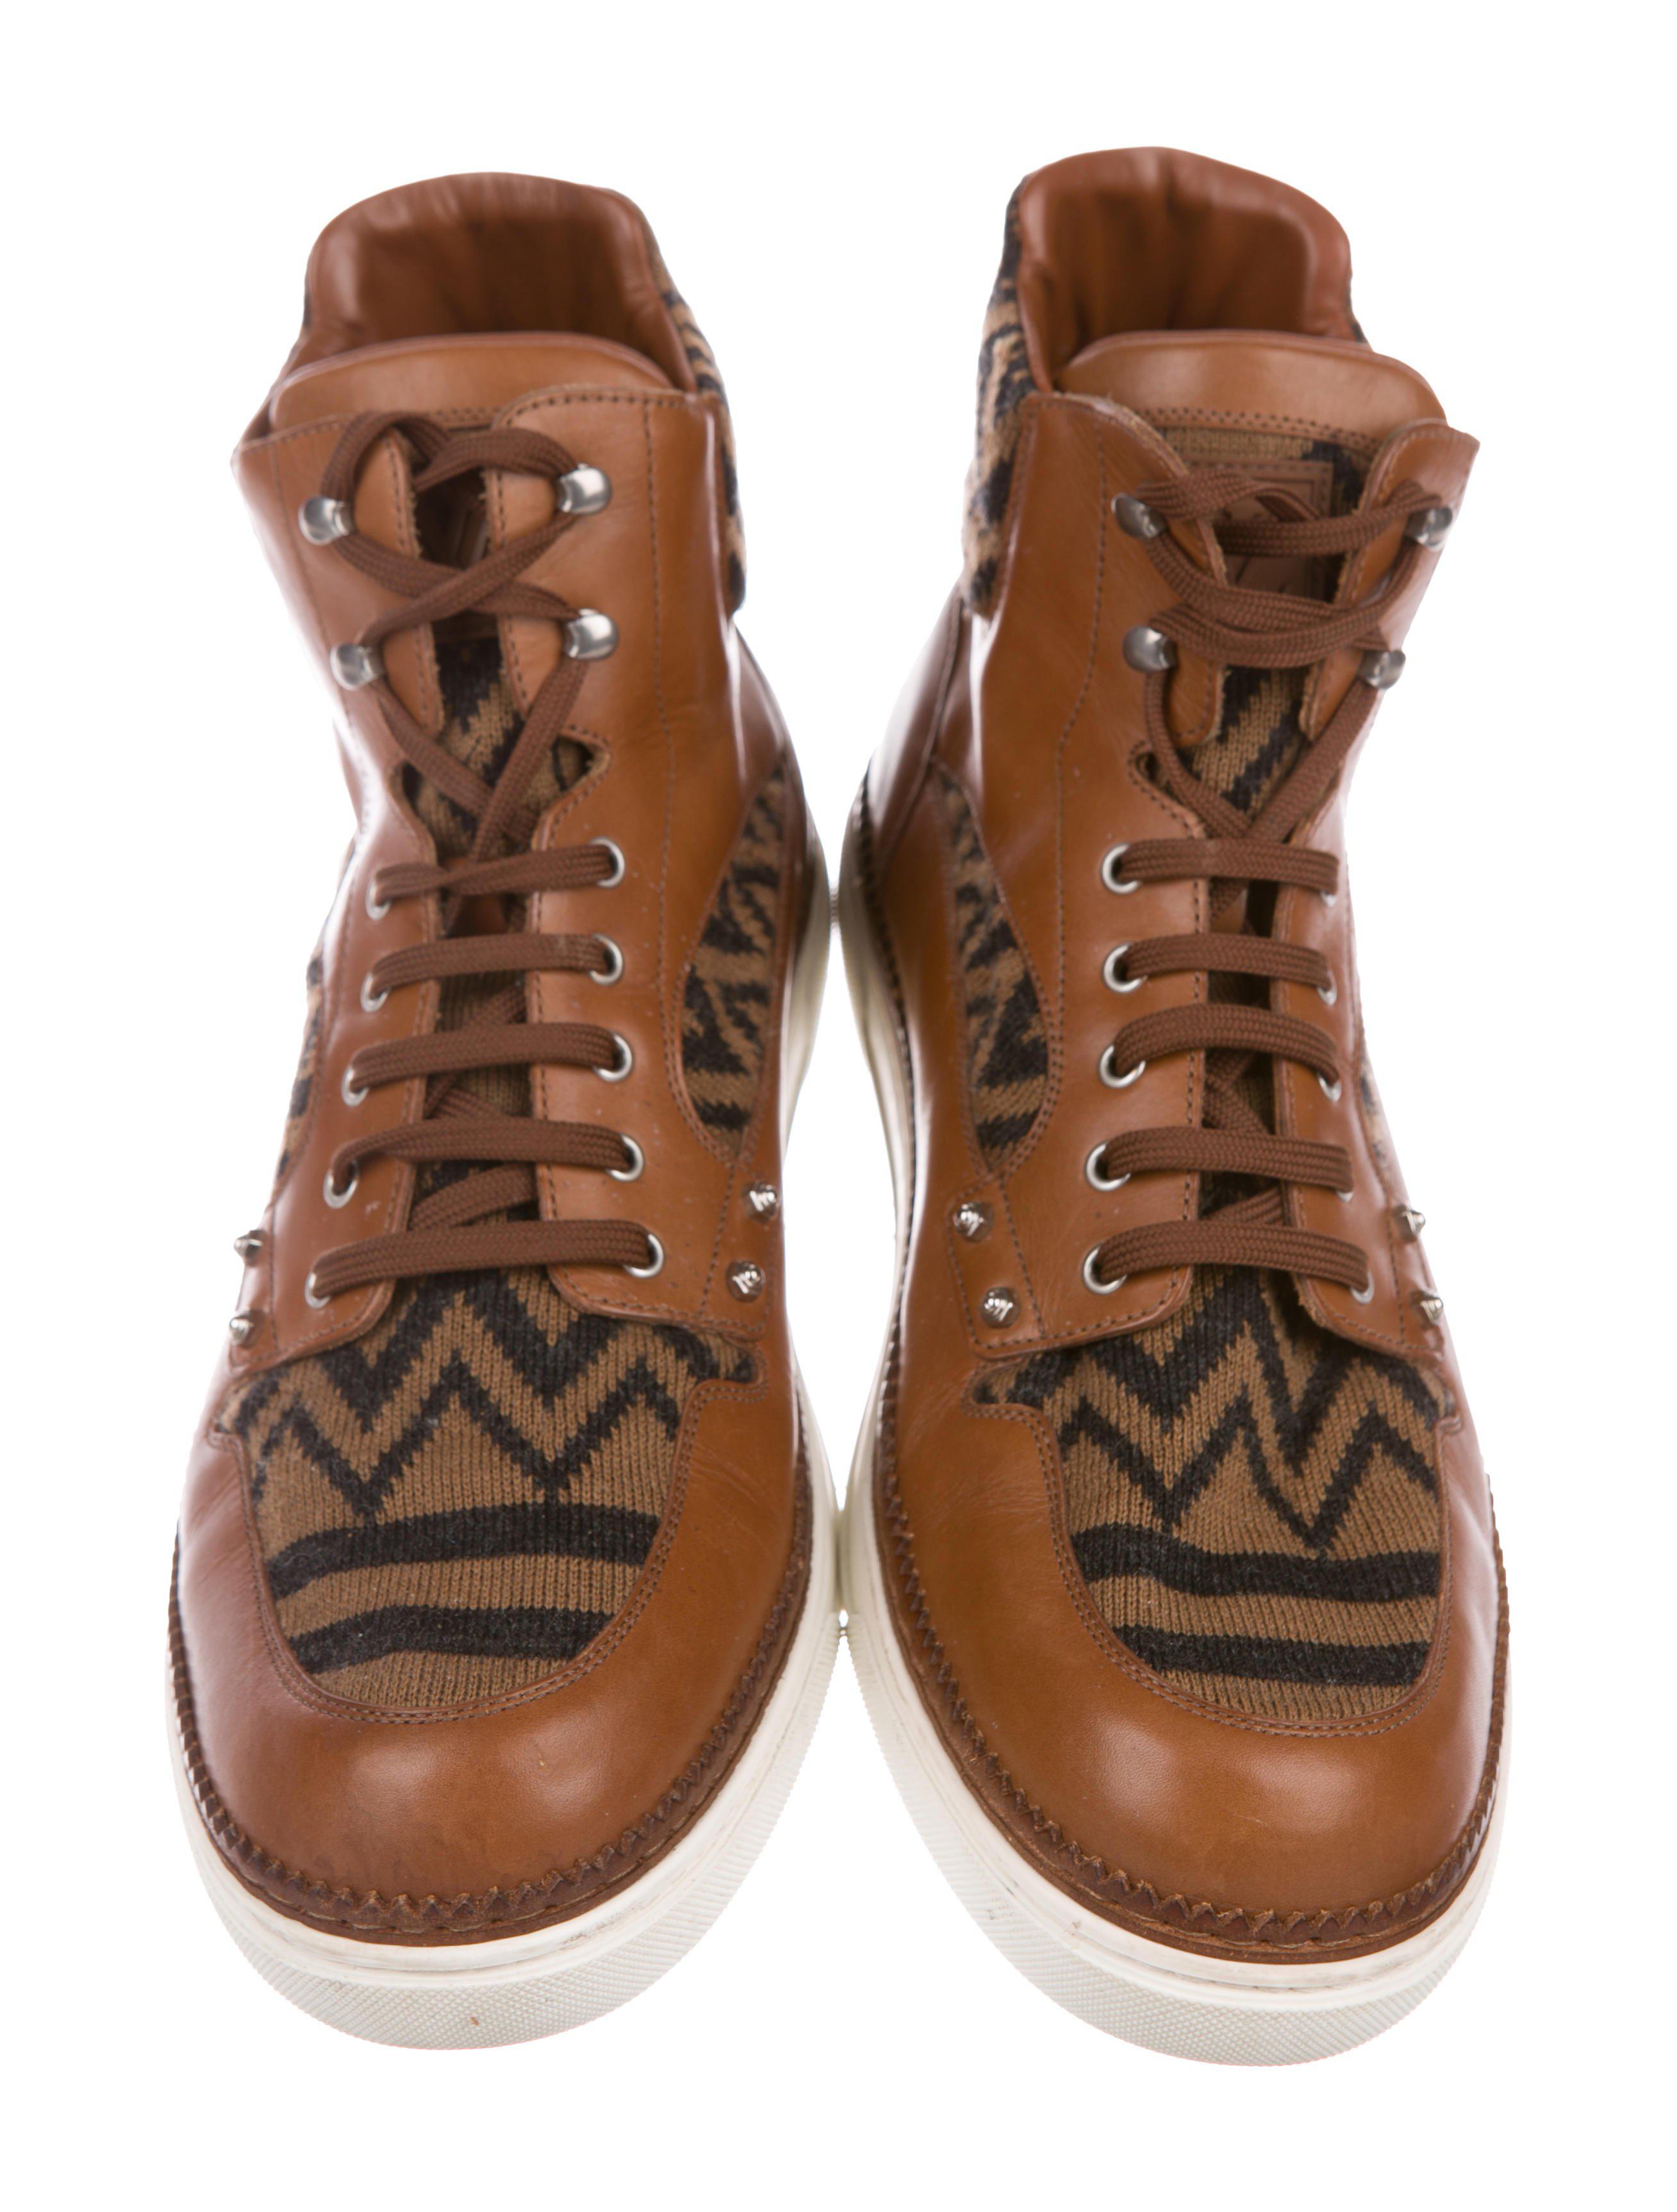 Lyst - Louis Vuitton Leather Printed Boots Brown in Brown for Men